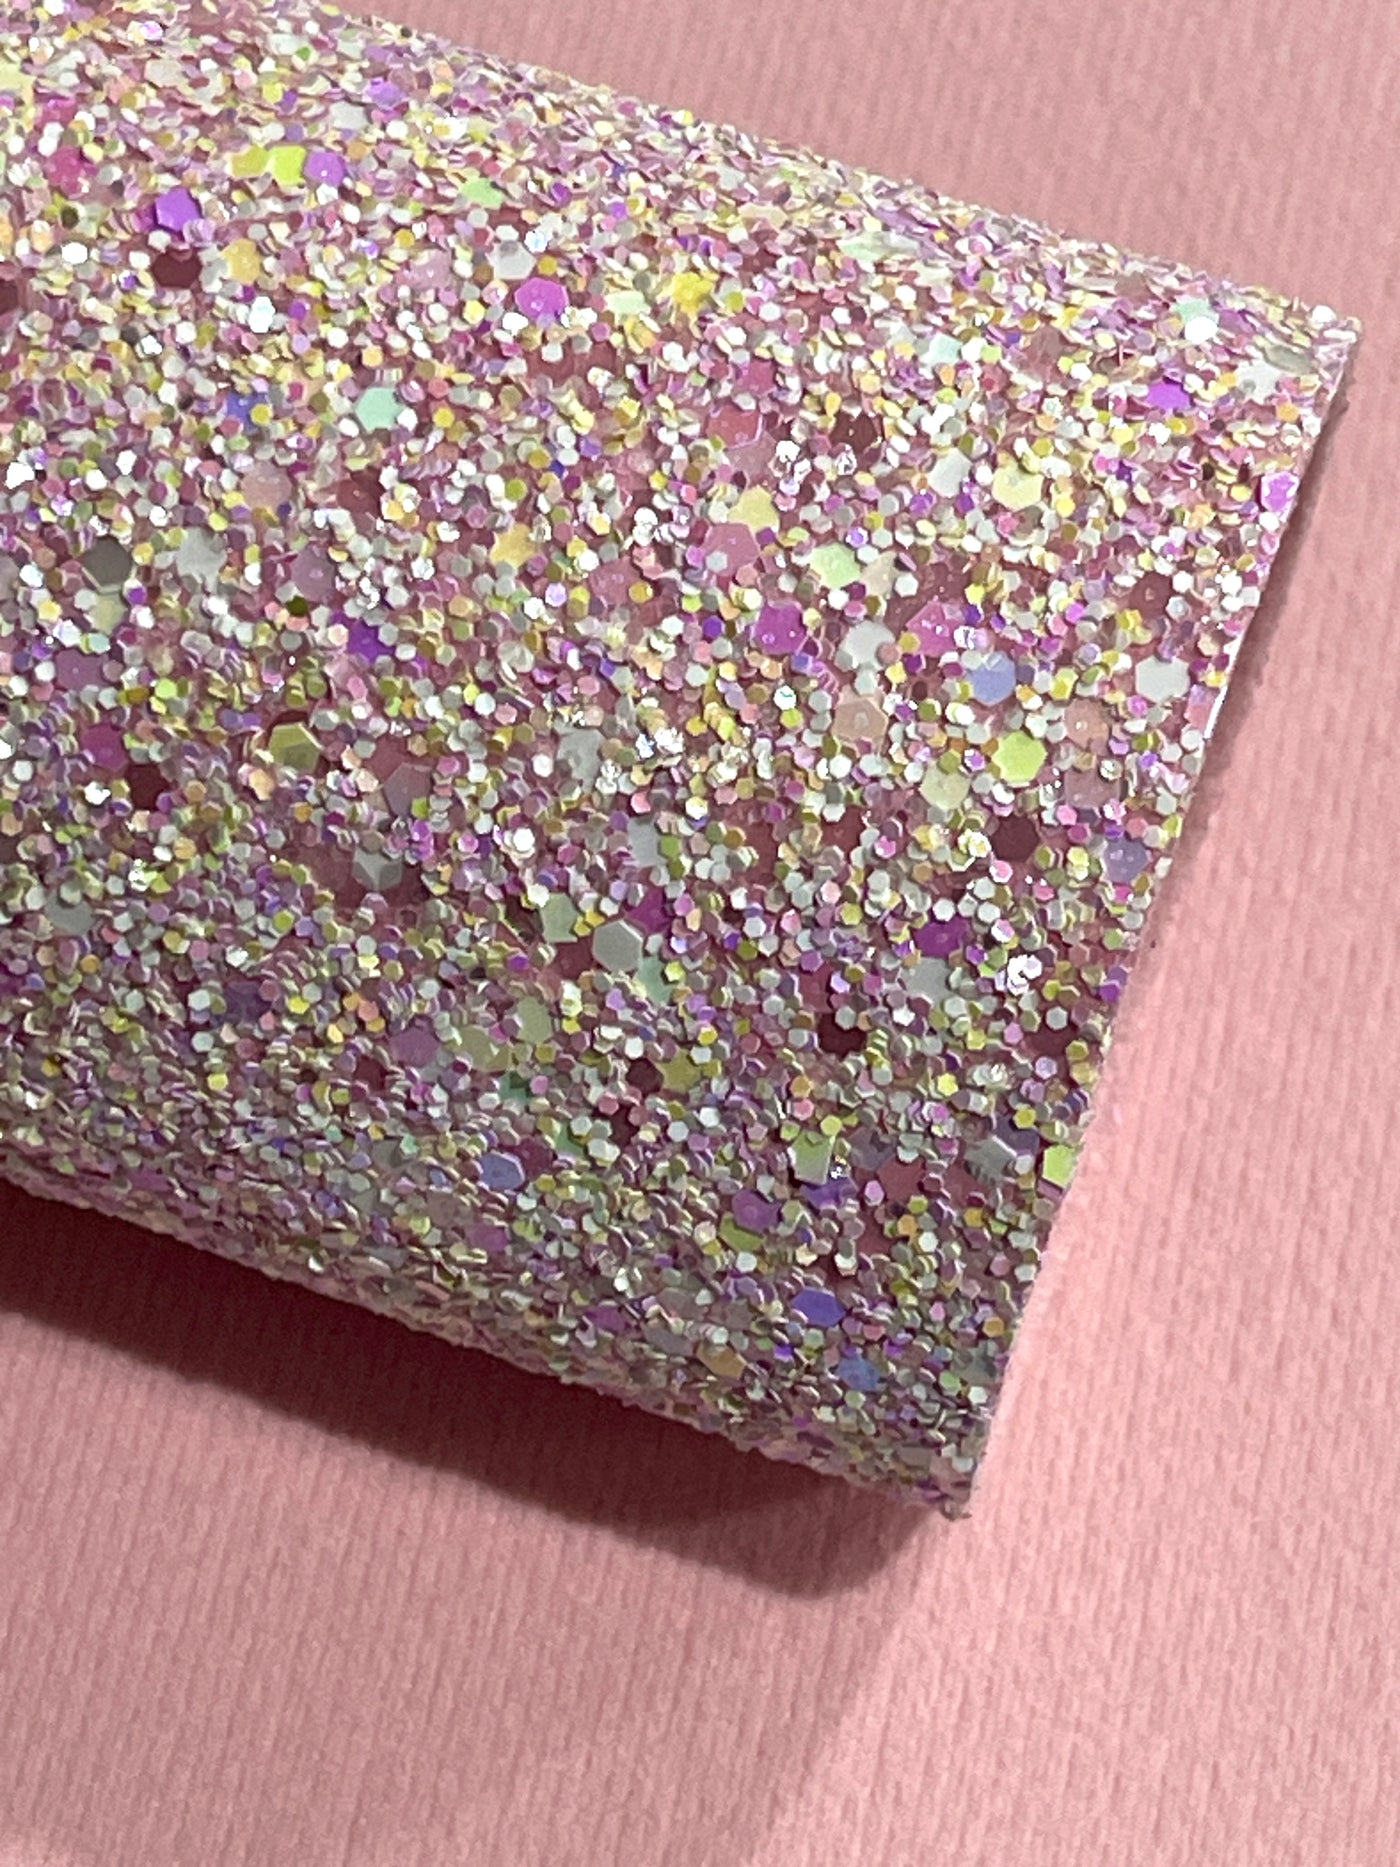 Marshmallow Puff Premium Chunky Glitter Leather - with pink felt rear